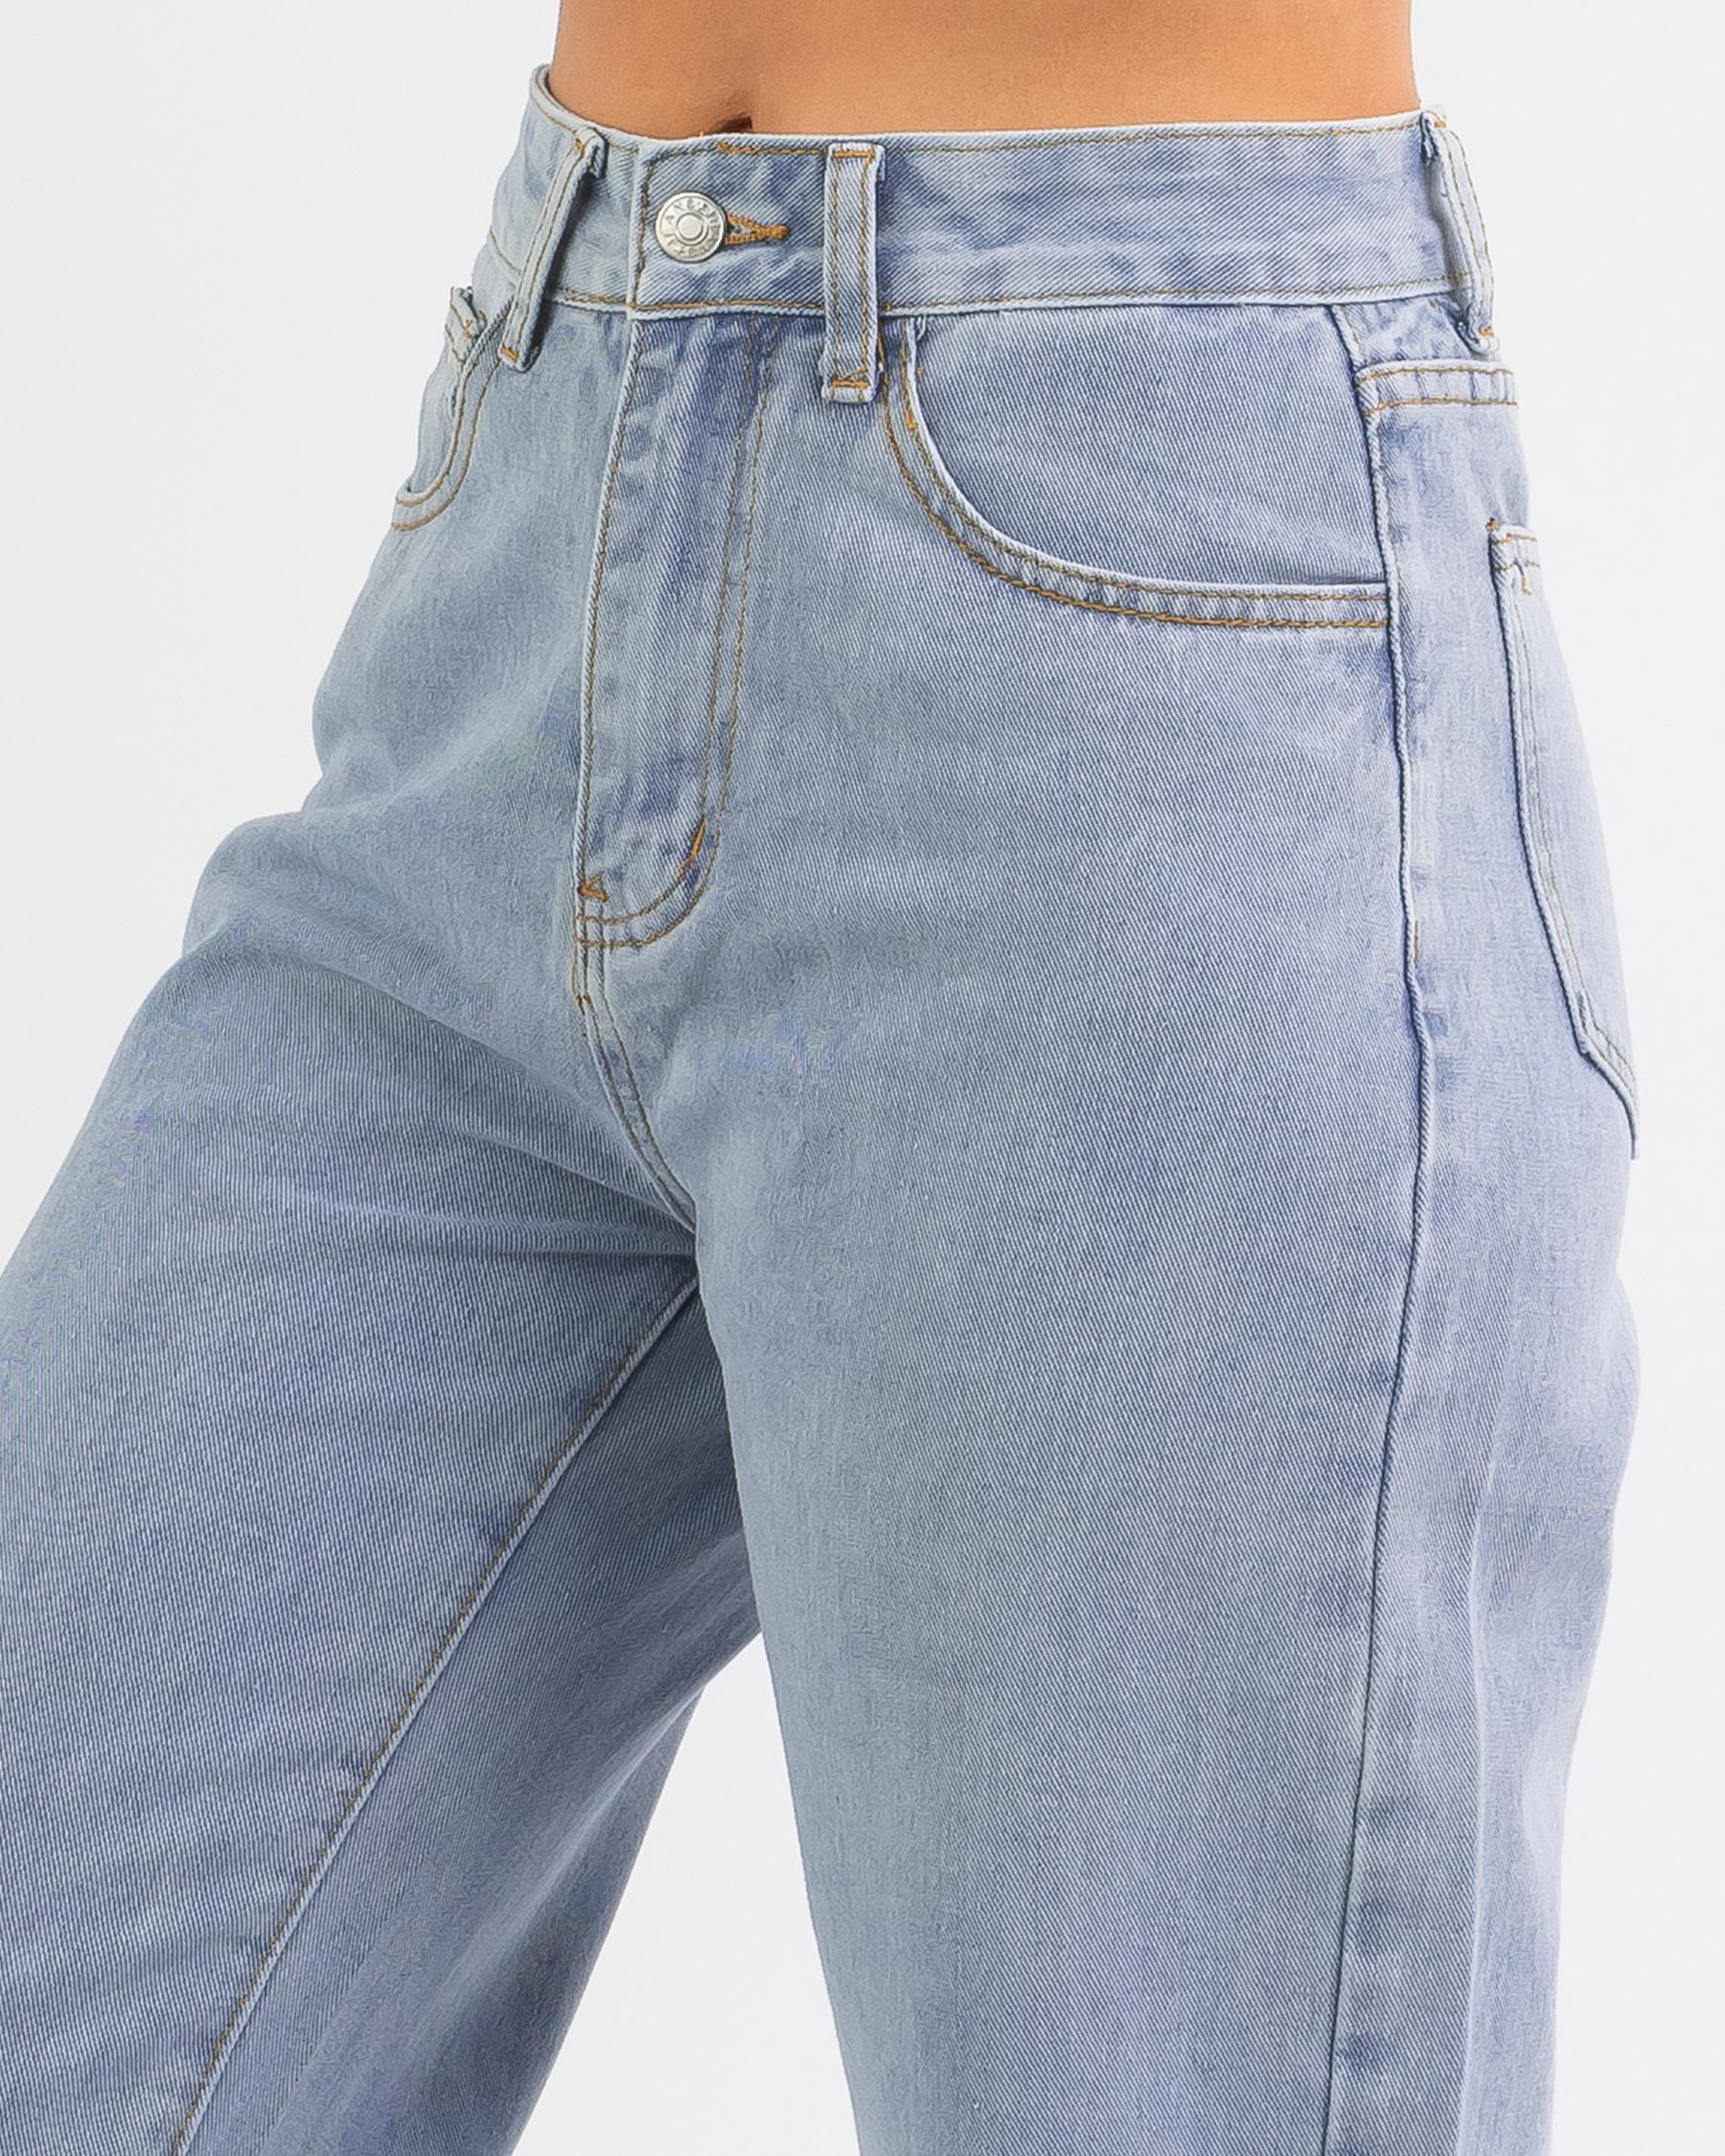 Shop DESU Gabrielle Jeans In Light Mid - Fast Shipping & Easy Returns ...